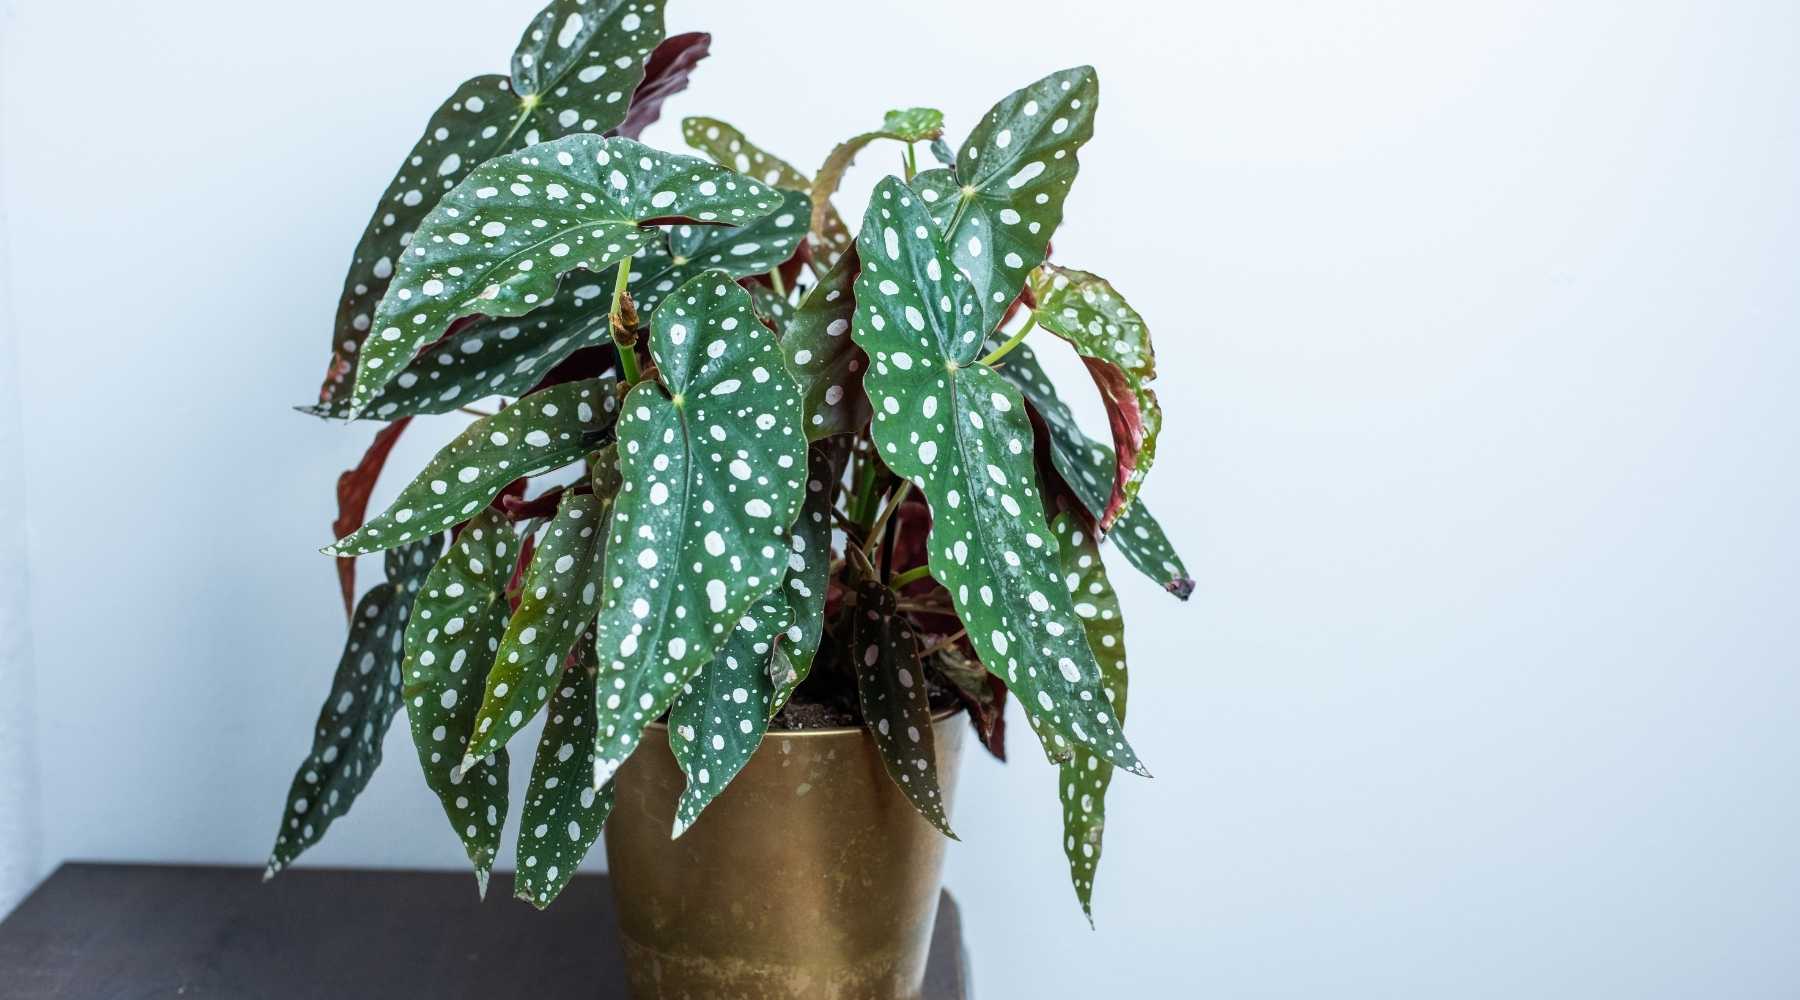 Guide On How To Grow And Care For Polka Dot Plants – Bloombox Club